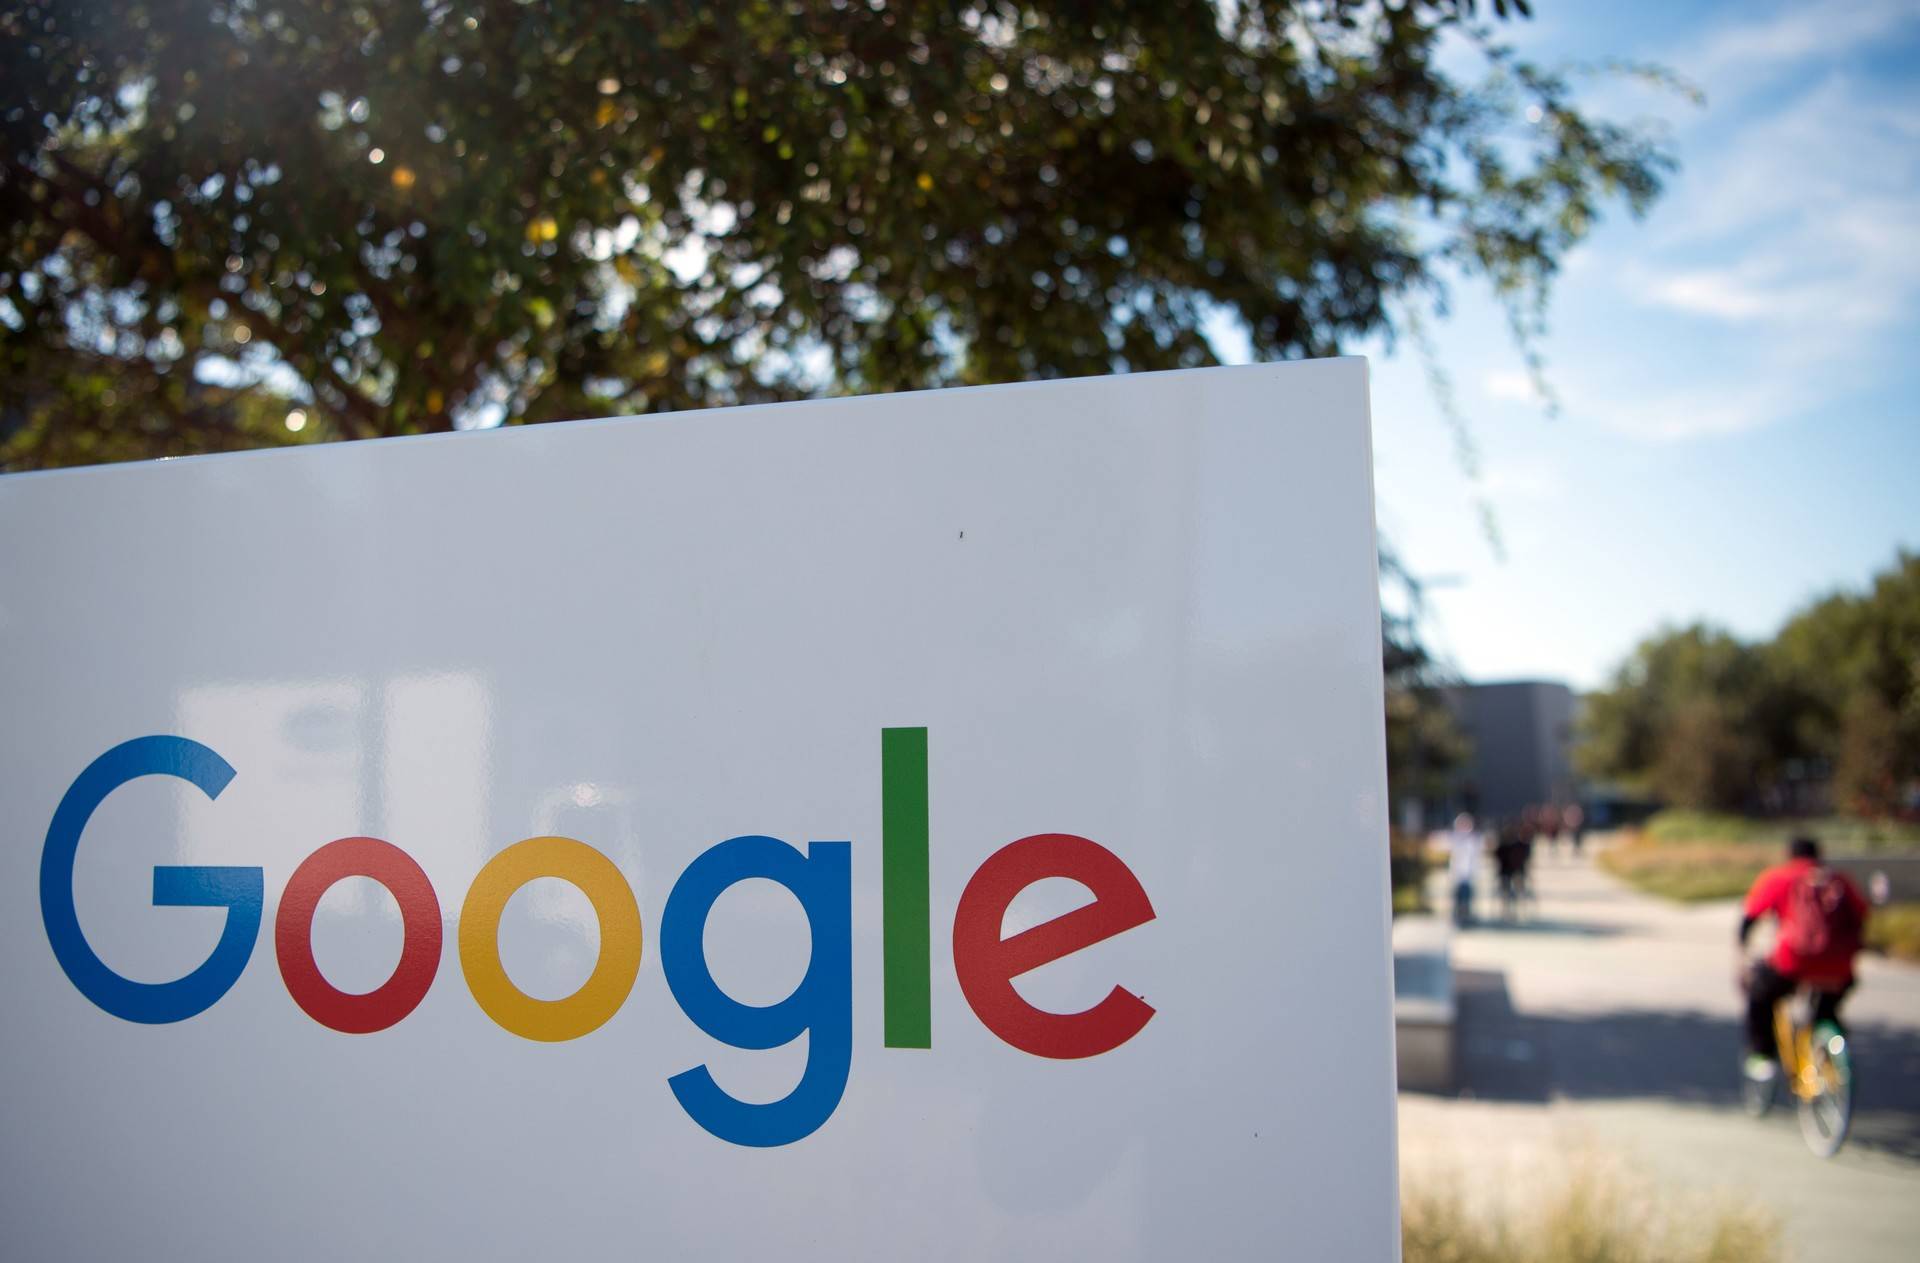 The Google sign and logo at the Googleplex in Menlo Park. JOSH EDELSON/AFP/Getty Images